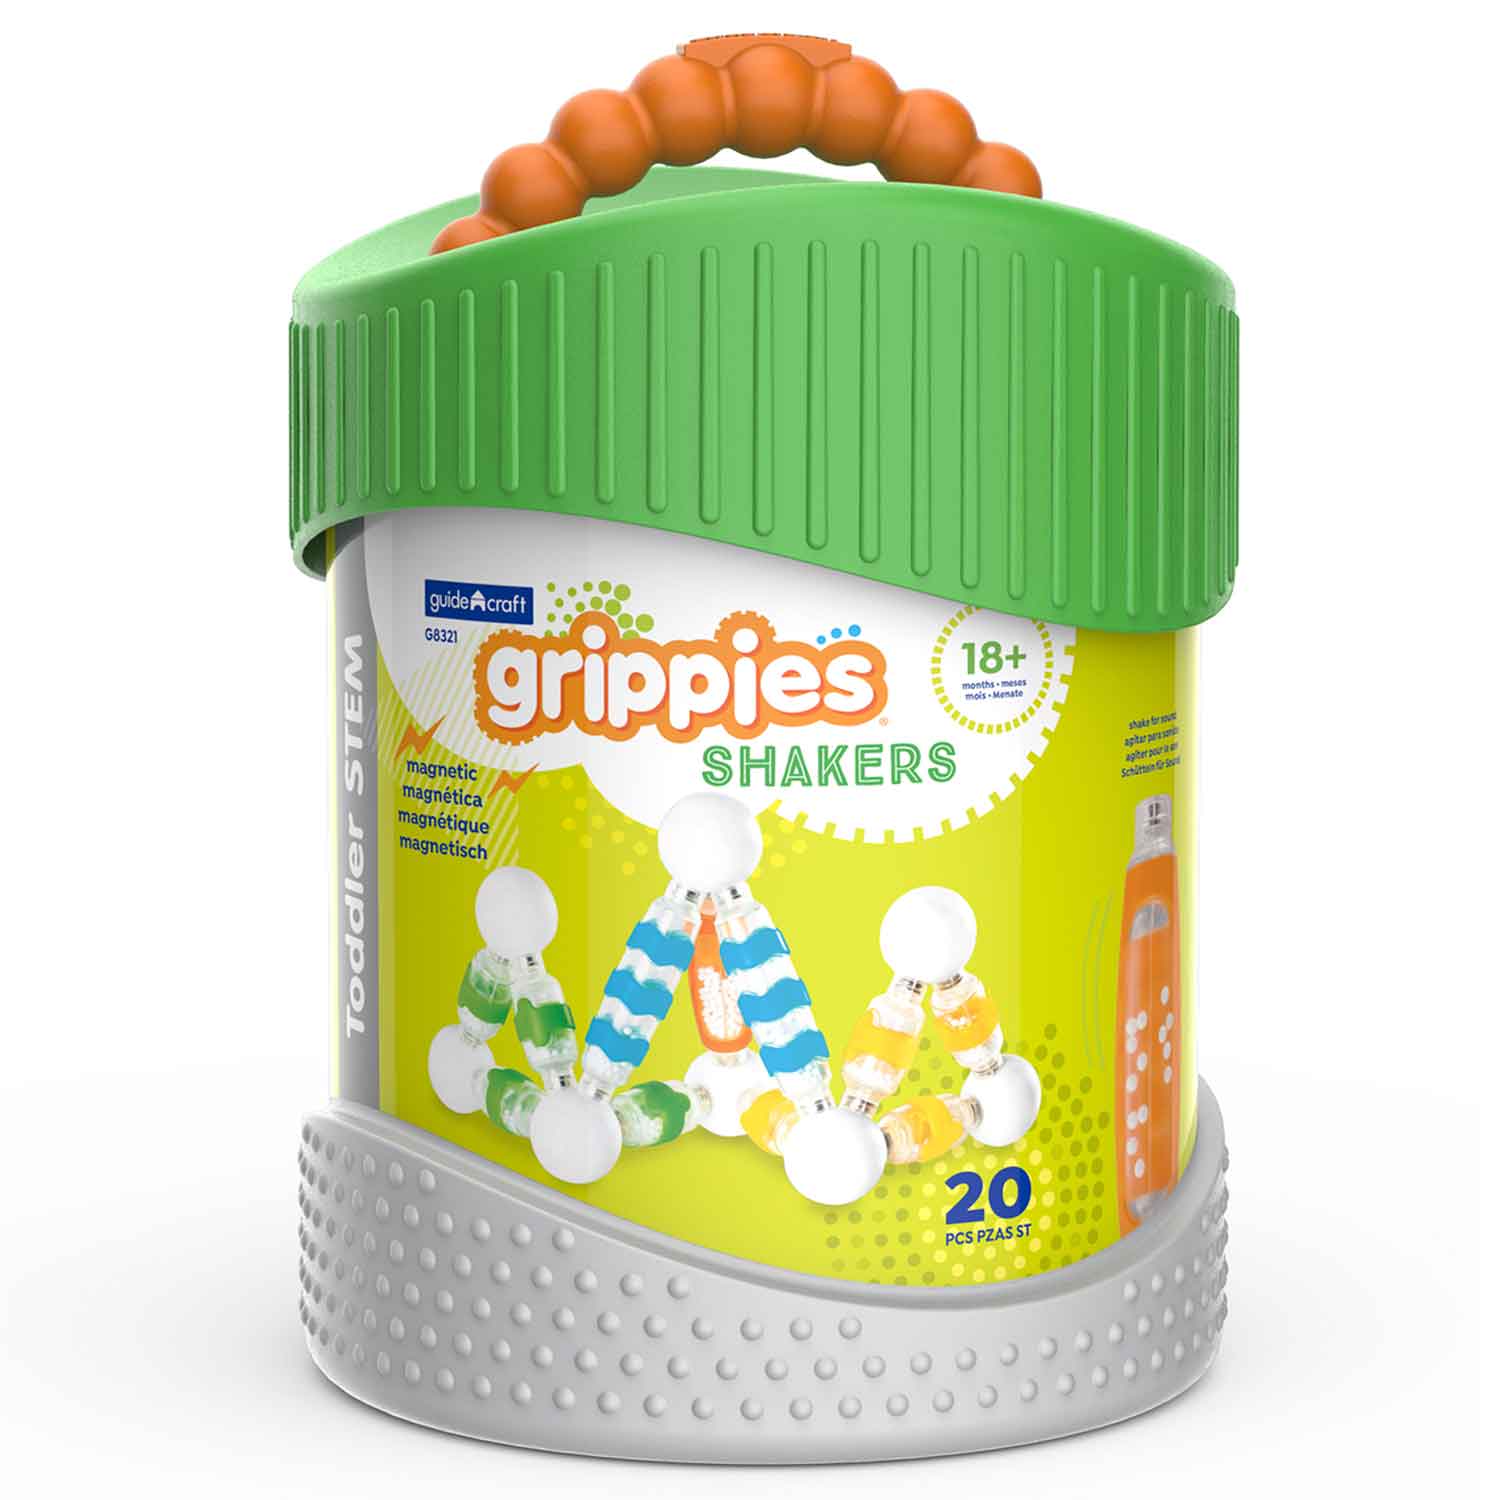 Grippies Shakers